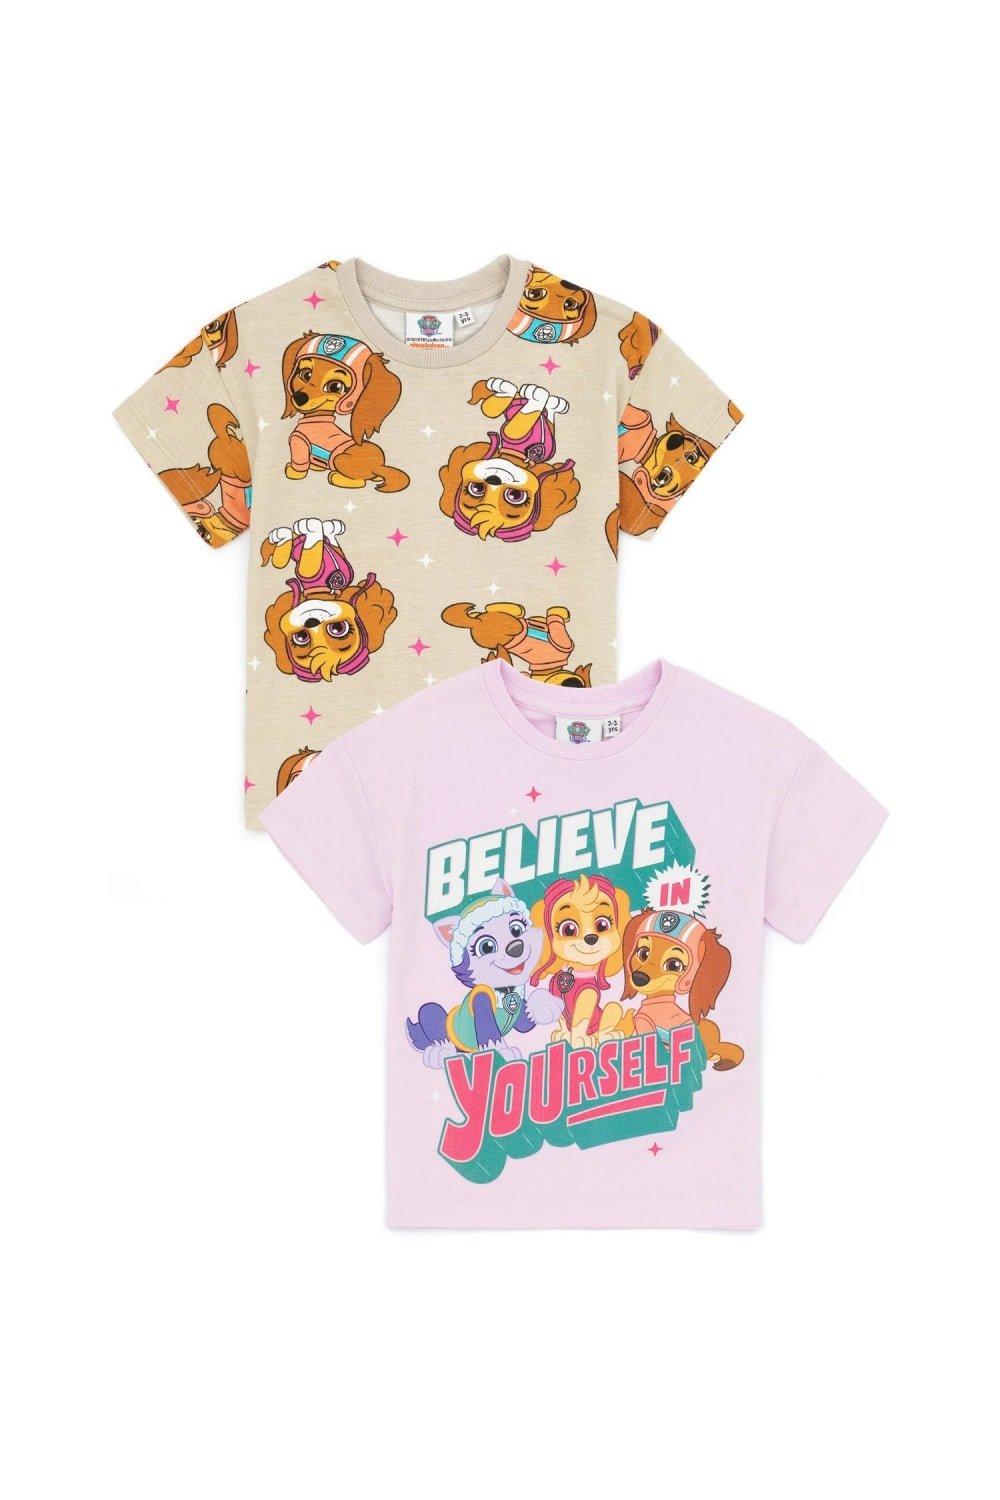 Believe In Yourself T-Shirt Pack of 2